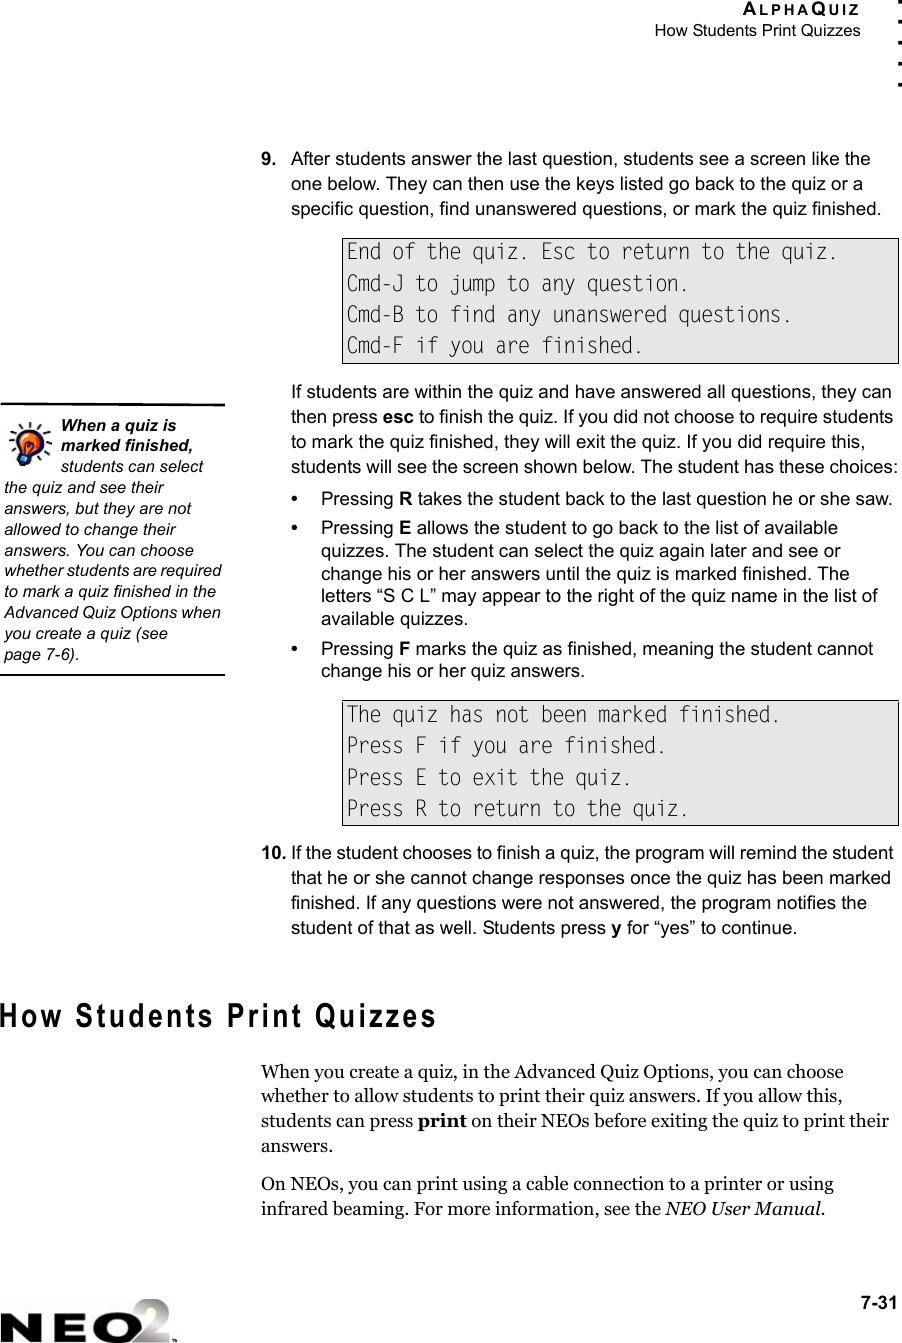 ALPHAQUIZHow Students Print Quizzes7-31. . . . .9. After students answer the last question, students see a screen like the one below. They can then use the keys listed go back to the quiz or a specific question, find unanswered questions, or mark the quiz finished.If students are within the quiz and have answered all questions, they can then press esc to finish the quiz. If you did not choose to require students to mark the quiz finished, they will exit the quiz. If you did require this, students will see the screen shown below. The student has these choices:•Pressing R takes the student back to the last question he or she saw.•Pressing E allows the student to go back to the list of available quizzes. The student can select the quiz again later and see or change his or her answers until the quiz is marked finished. The letters “S C L” may appear to the right of the quiz name in the list of available quizzes.•Pressing F marks the quiz as finished, meaning the student cannot change his or her quiz answers.10. If the student chooses to finish a quiz, the program will remind the student that he or she cannot change responses once the quiz has been marked finished. If any questions were not answered, the program notifies the student of that as well. Students press y for “yes” to continue.How Students Print QuizzesWhen you create a quiz, in the Advanced Quiz Options, you can choose whether to allow students to print their quiz answers. If you allow this, students can press print on their NEOs before exiting the quiz to print their answers.On NEOs, you can print using a cable connection to a printer or using infrared beaming. For more information, see the NEO User Manual.End of the quiz. Esc to return to the quiz.Cmd-J to jump to any question.Cmd-B to find any unanswered questions.Cmd-F if you are finished.The quiz has not been marked finished.Press F if you are finished.Press E to exit the quiz.Press R to return to the quiz.When a quiz is marked finished, students can select the quiz and see their answers, but they are not allowed to change their answers. You can choose whether students are required to mark a quiz finished in the Advanced Quiz Options when you create a quiz (seepage 7-6).